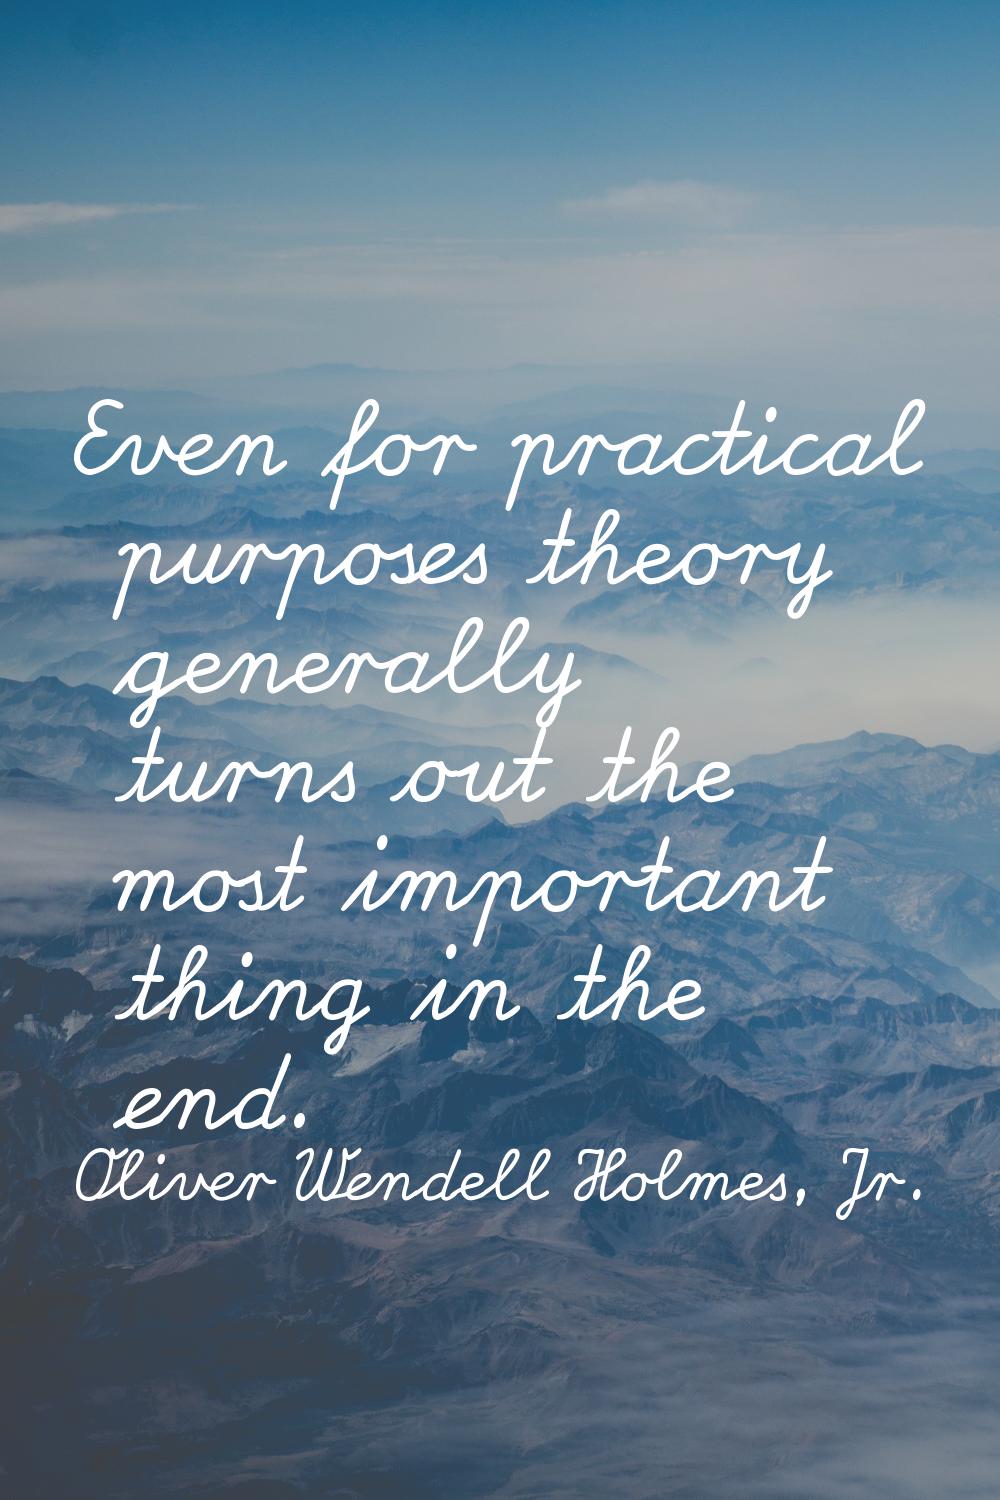 Even for practical purposes theory generally turns out the most important thing in the end.